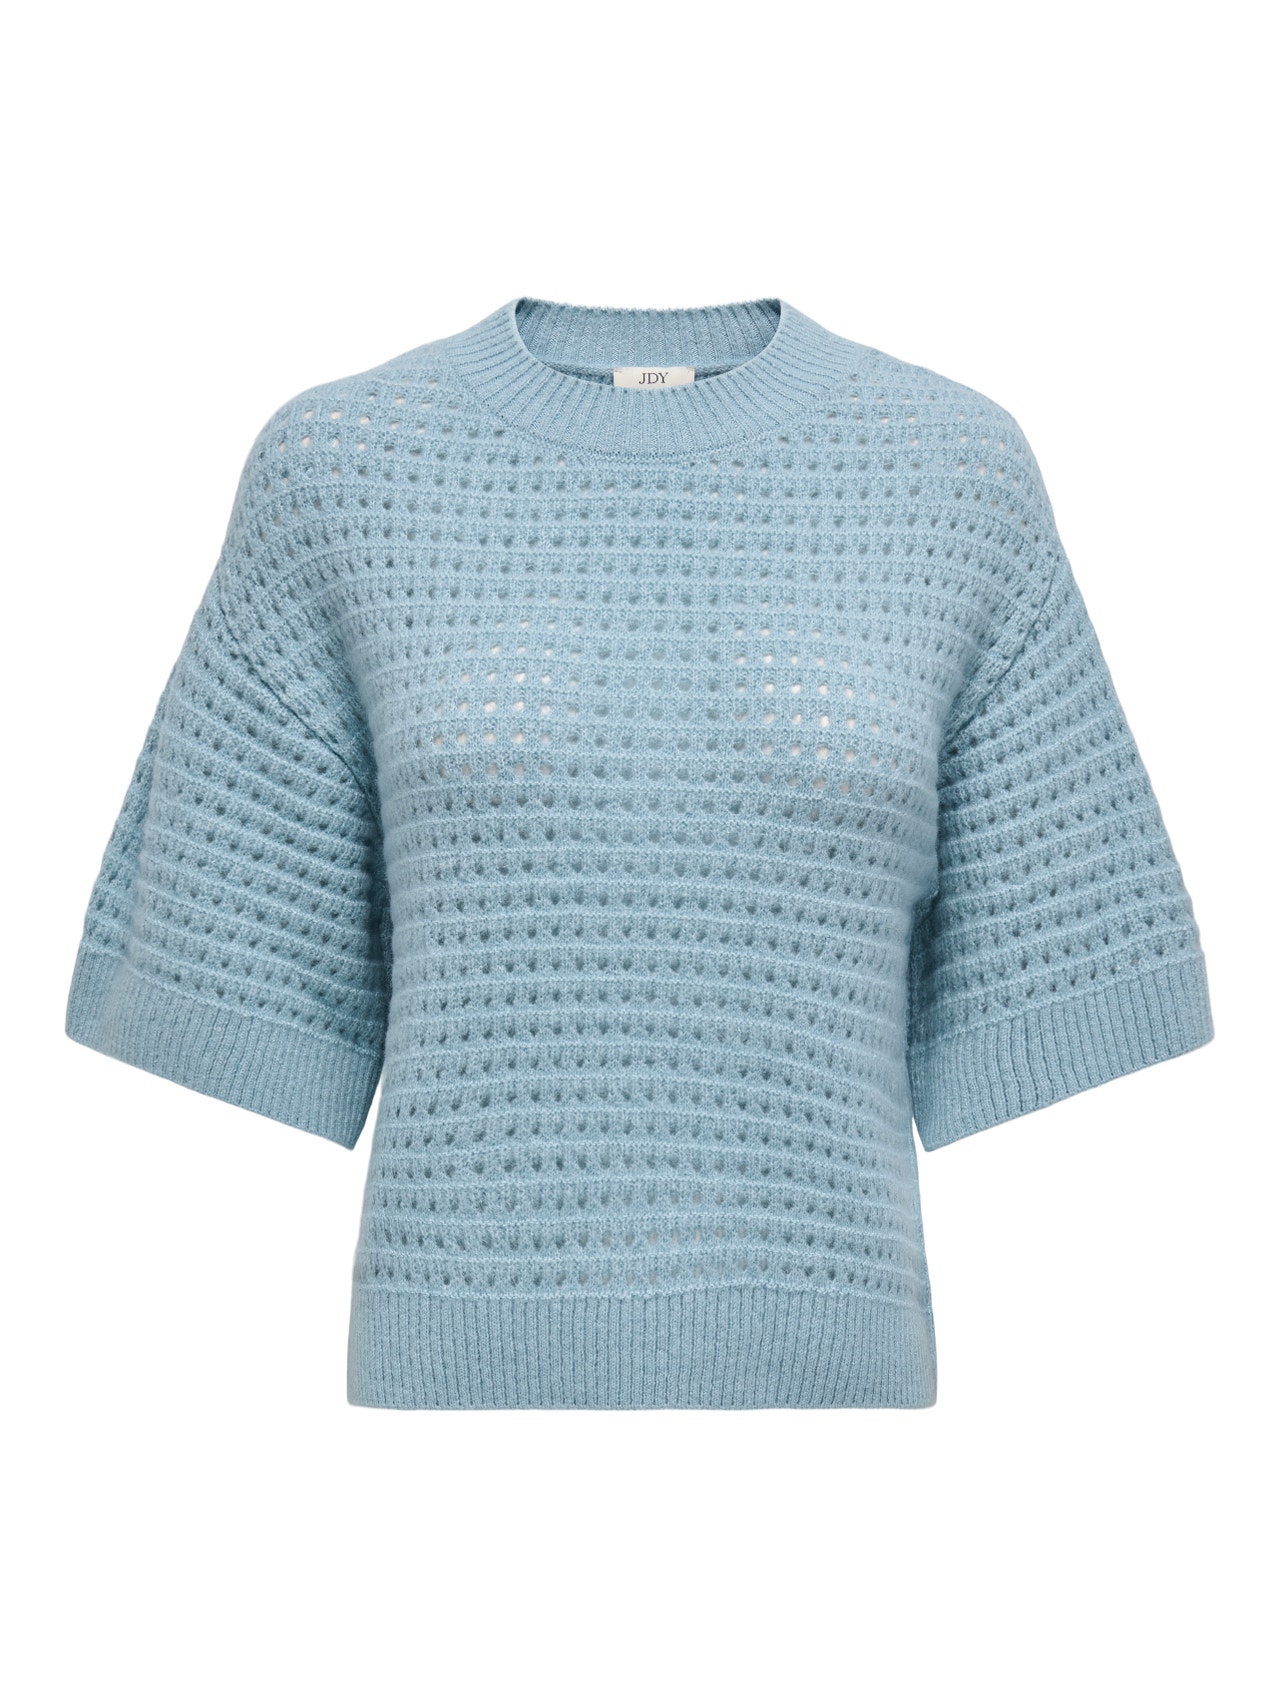 ONLY Knit Fit Round Neck Ribbed cuffs Dropped shoulders Pullover -Powder Blue - 15342482